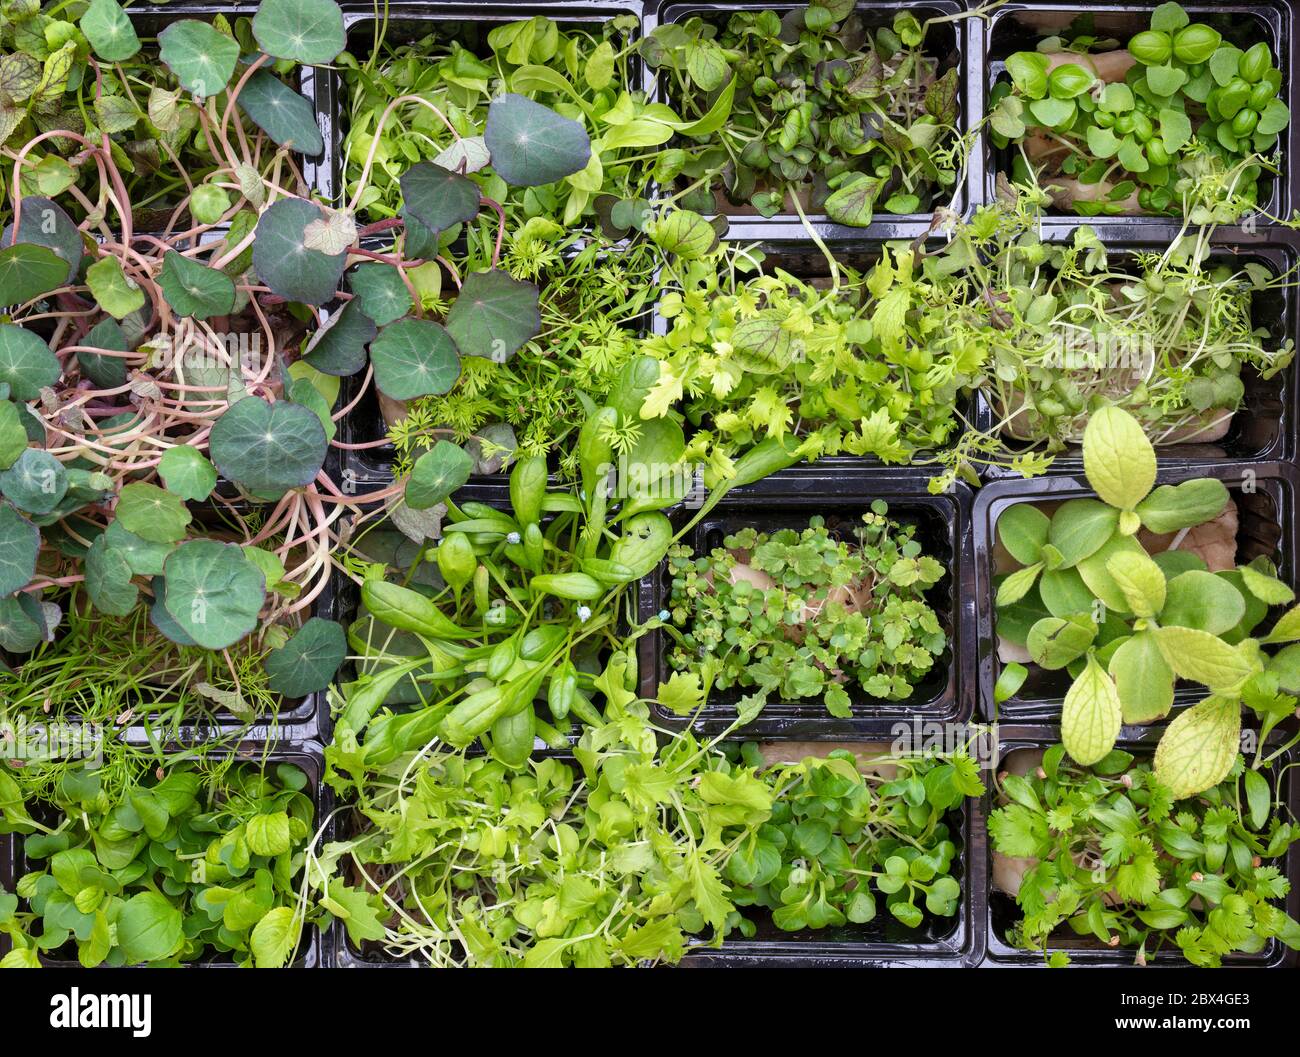 Microgreens. Hydroponically grown herbs, salads and edible flowers. Stock Photo